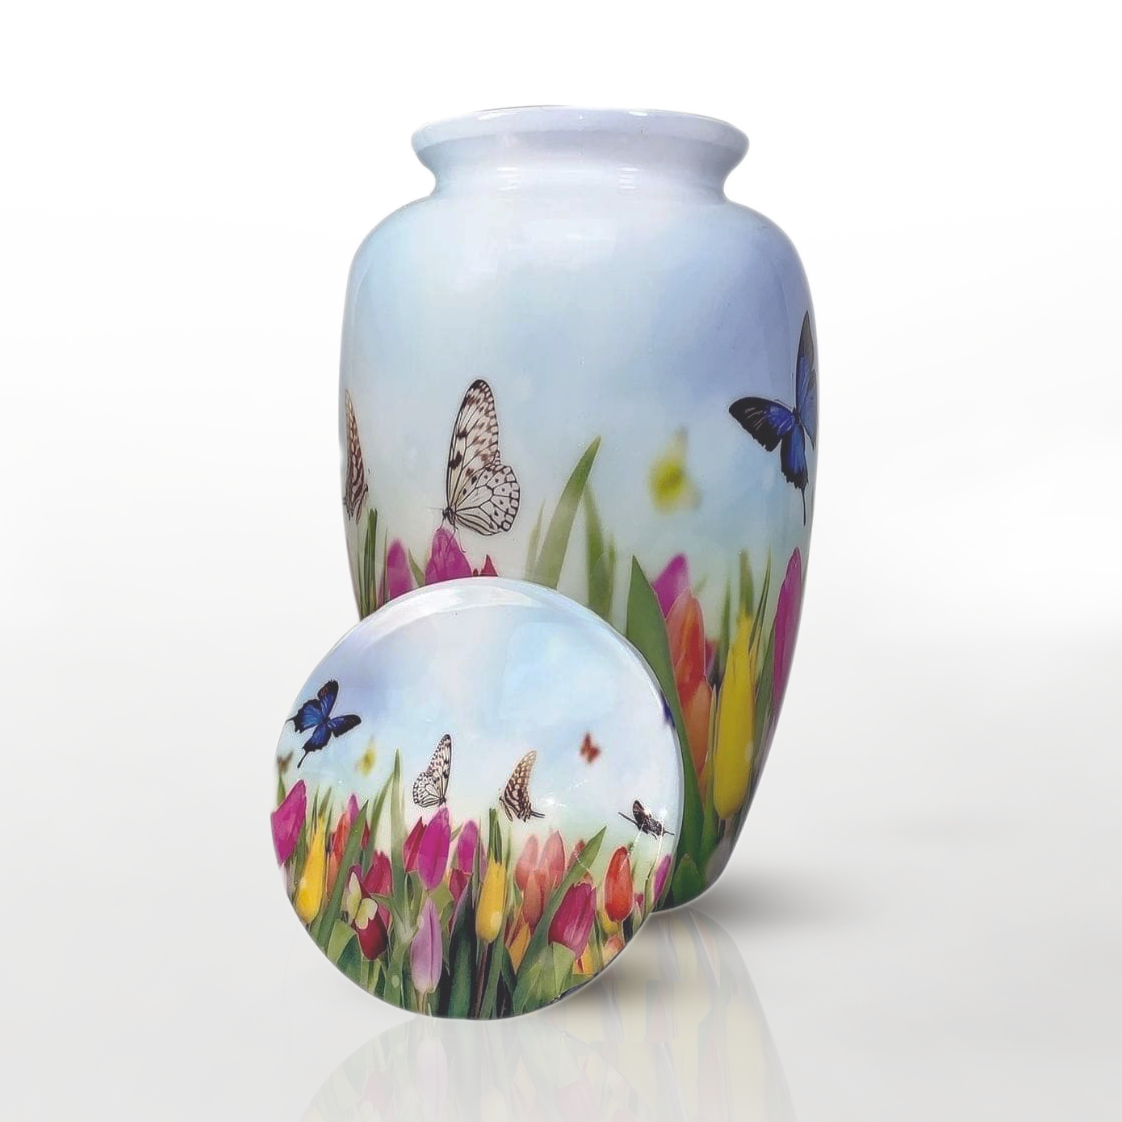 Beundre Adult Ashes Urn-Adult Urn for Ashes-Cremation Urns- The cremation urns for ashes and keepsakes for ashes come in a variety of styles to suit most tastes, decor and different volumes of funeral ashes.